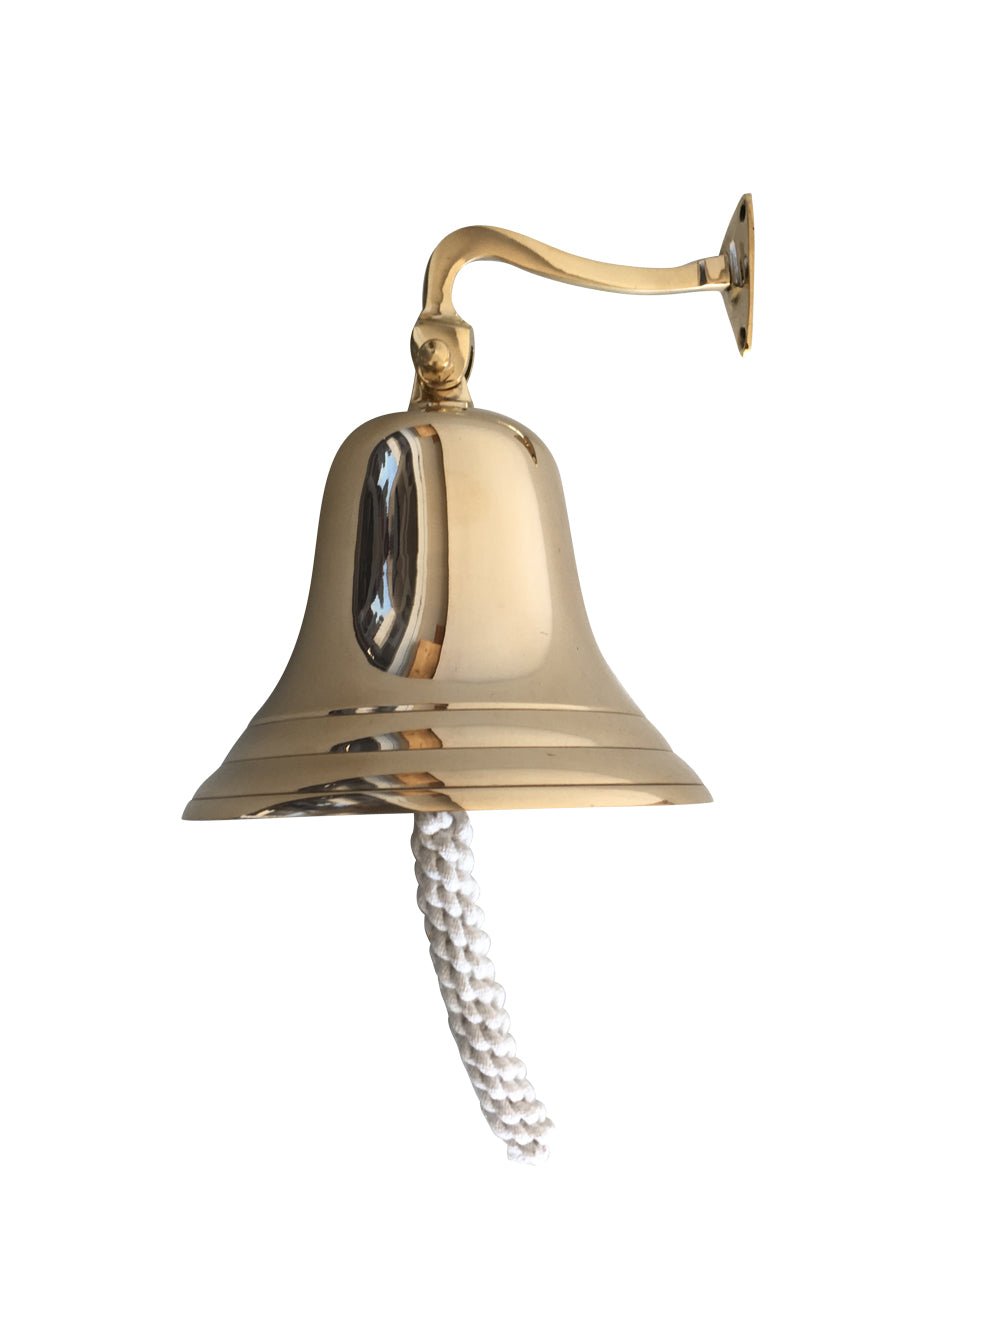 Wall Hanging Bell-150 mm- (BB101A) - Vintage World Australia - 3